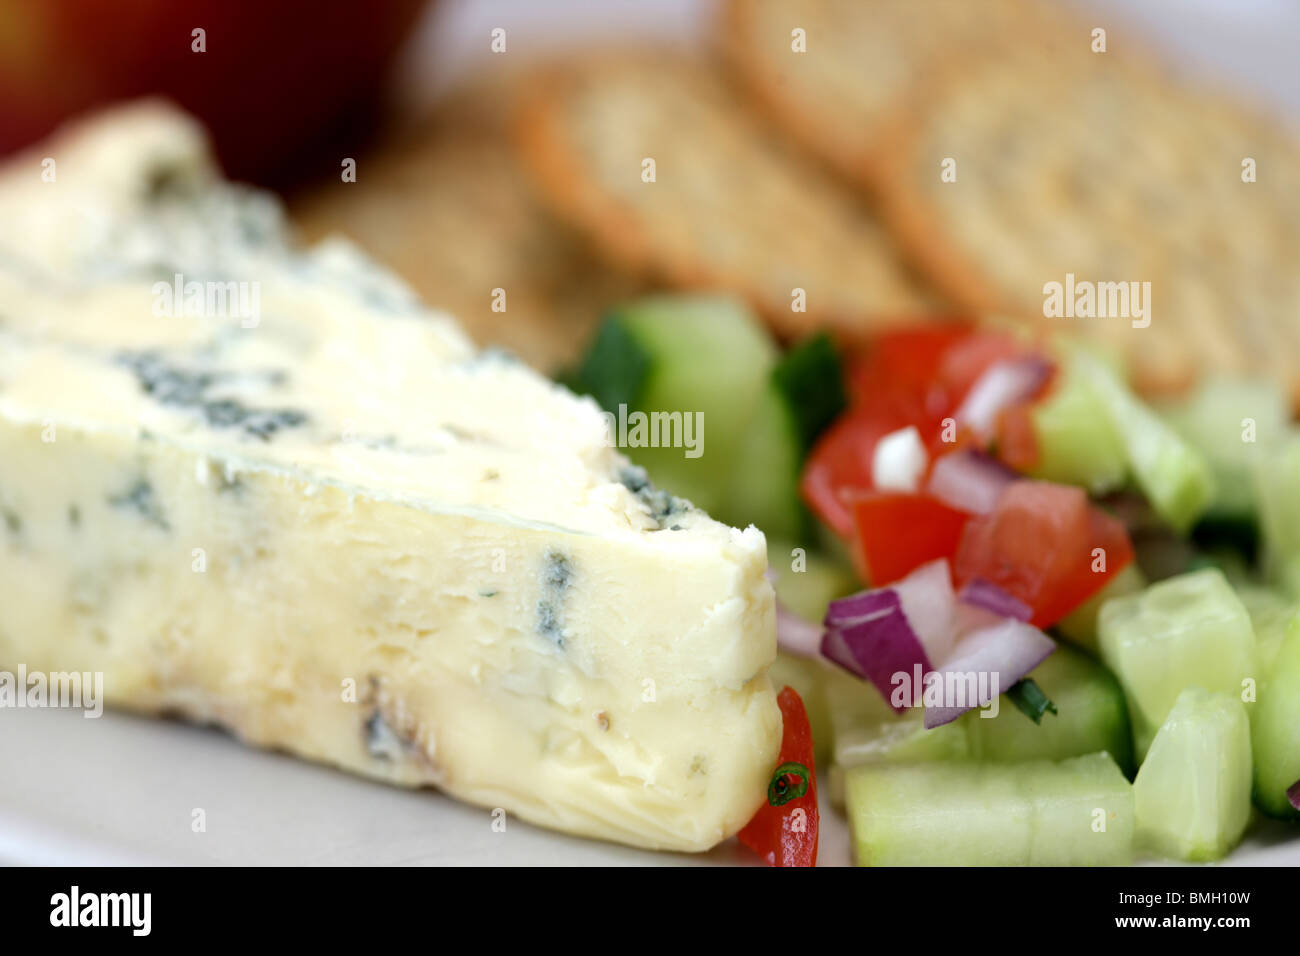 Health Colourful Dessert Plate Of Aromatic Stilton Cheese with Biscuits In Close Up With No People Stock Photo